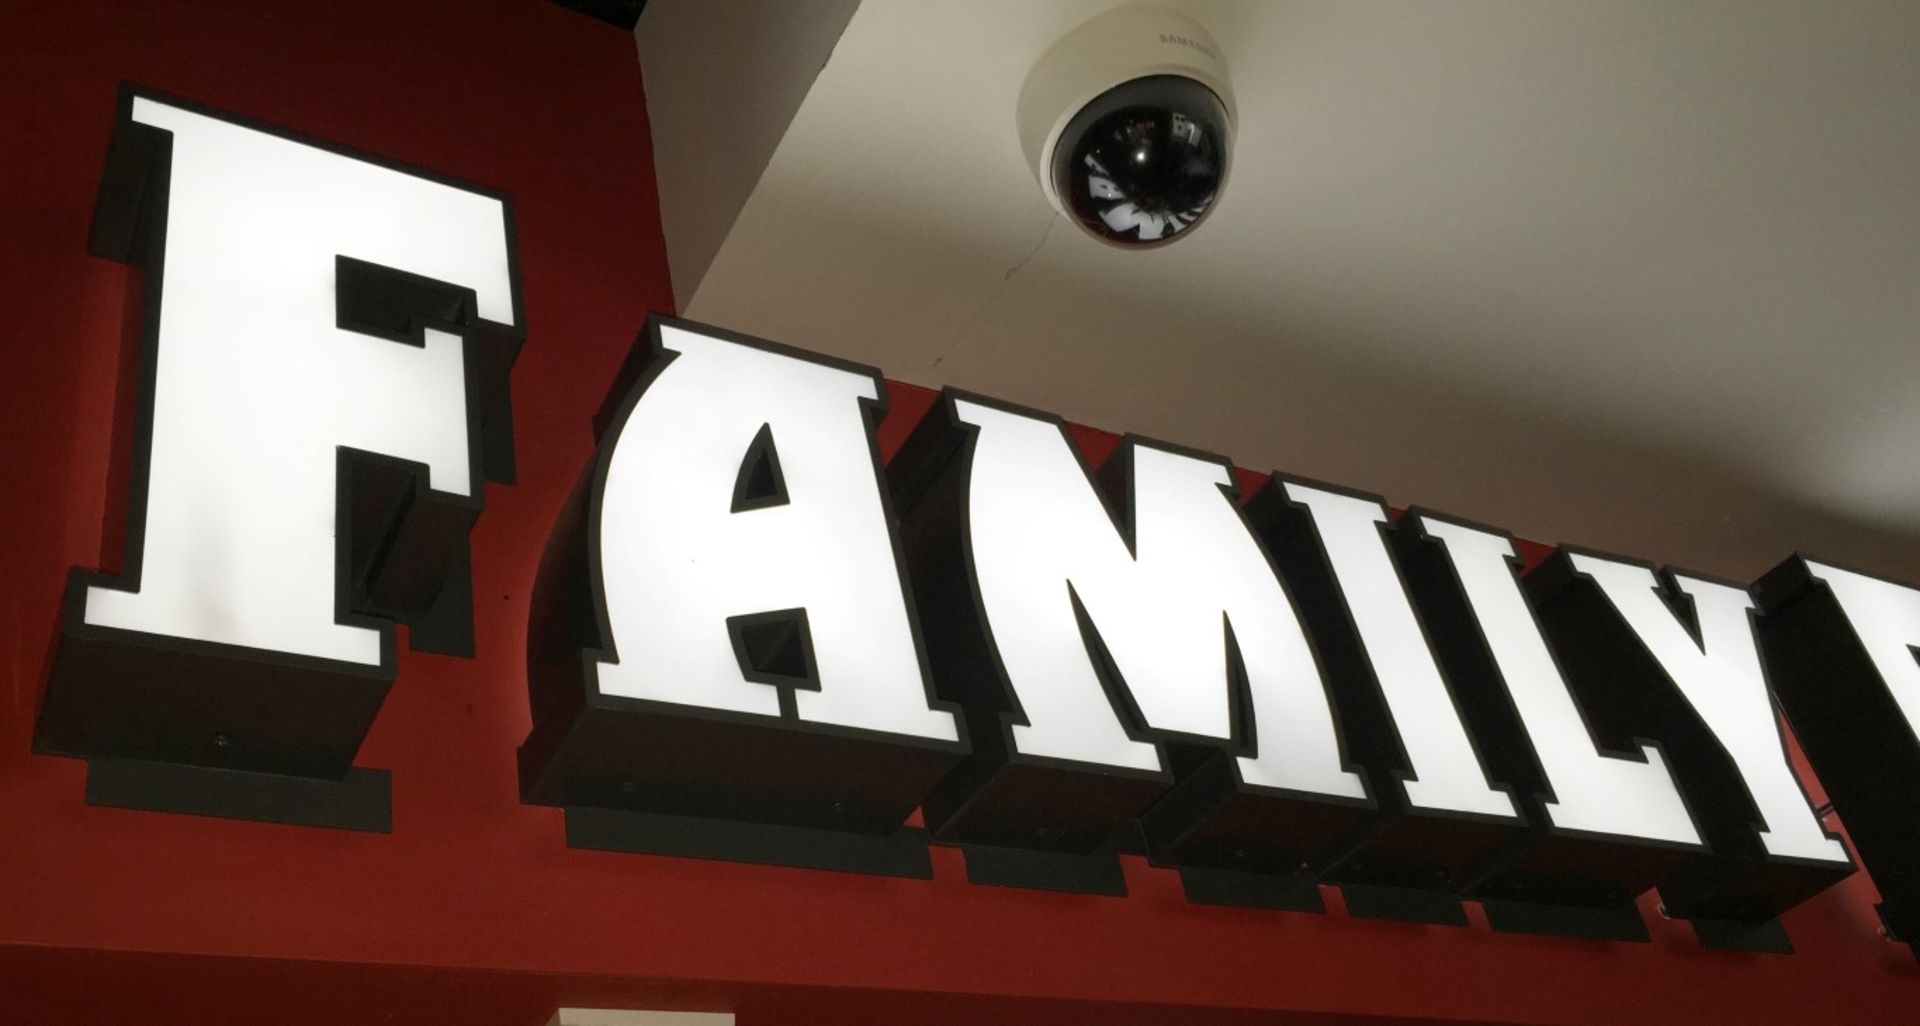 FAMILY FAVOURITES Illuminated SIGNAGE Individual Letters Measuring 9ft in Width - Approx Letter - Image 2 of 3